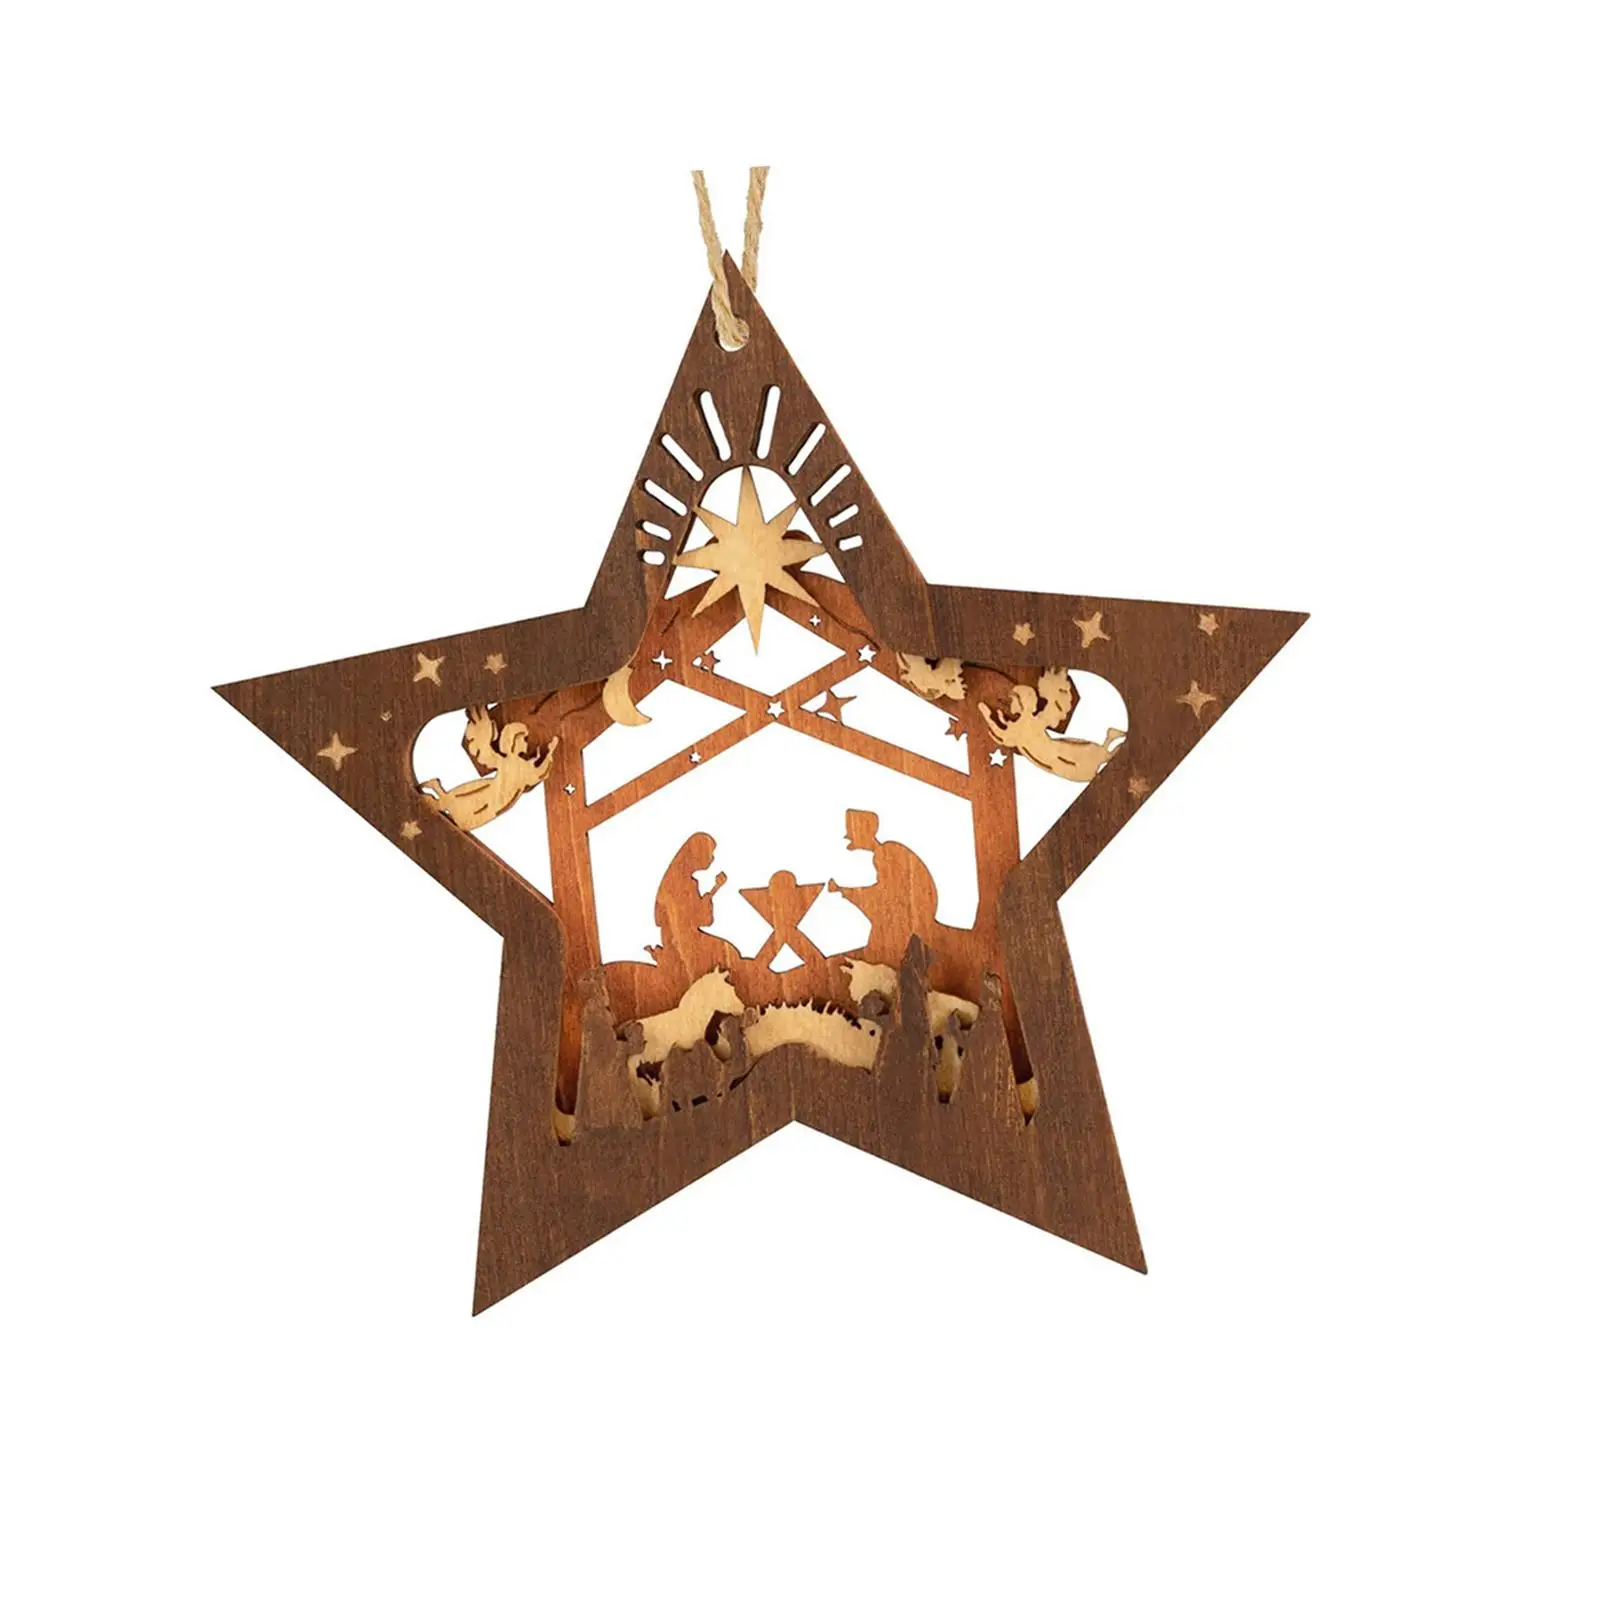 Christmas Nativity Scene Ornaments Festival Ornament Wood Hanging Christian Ornaments for Indoor Shelves Family Home Fireplace